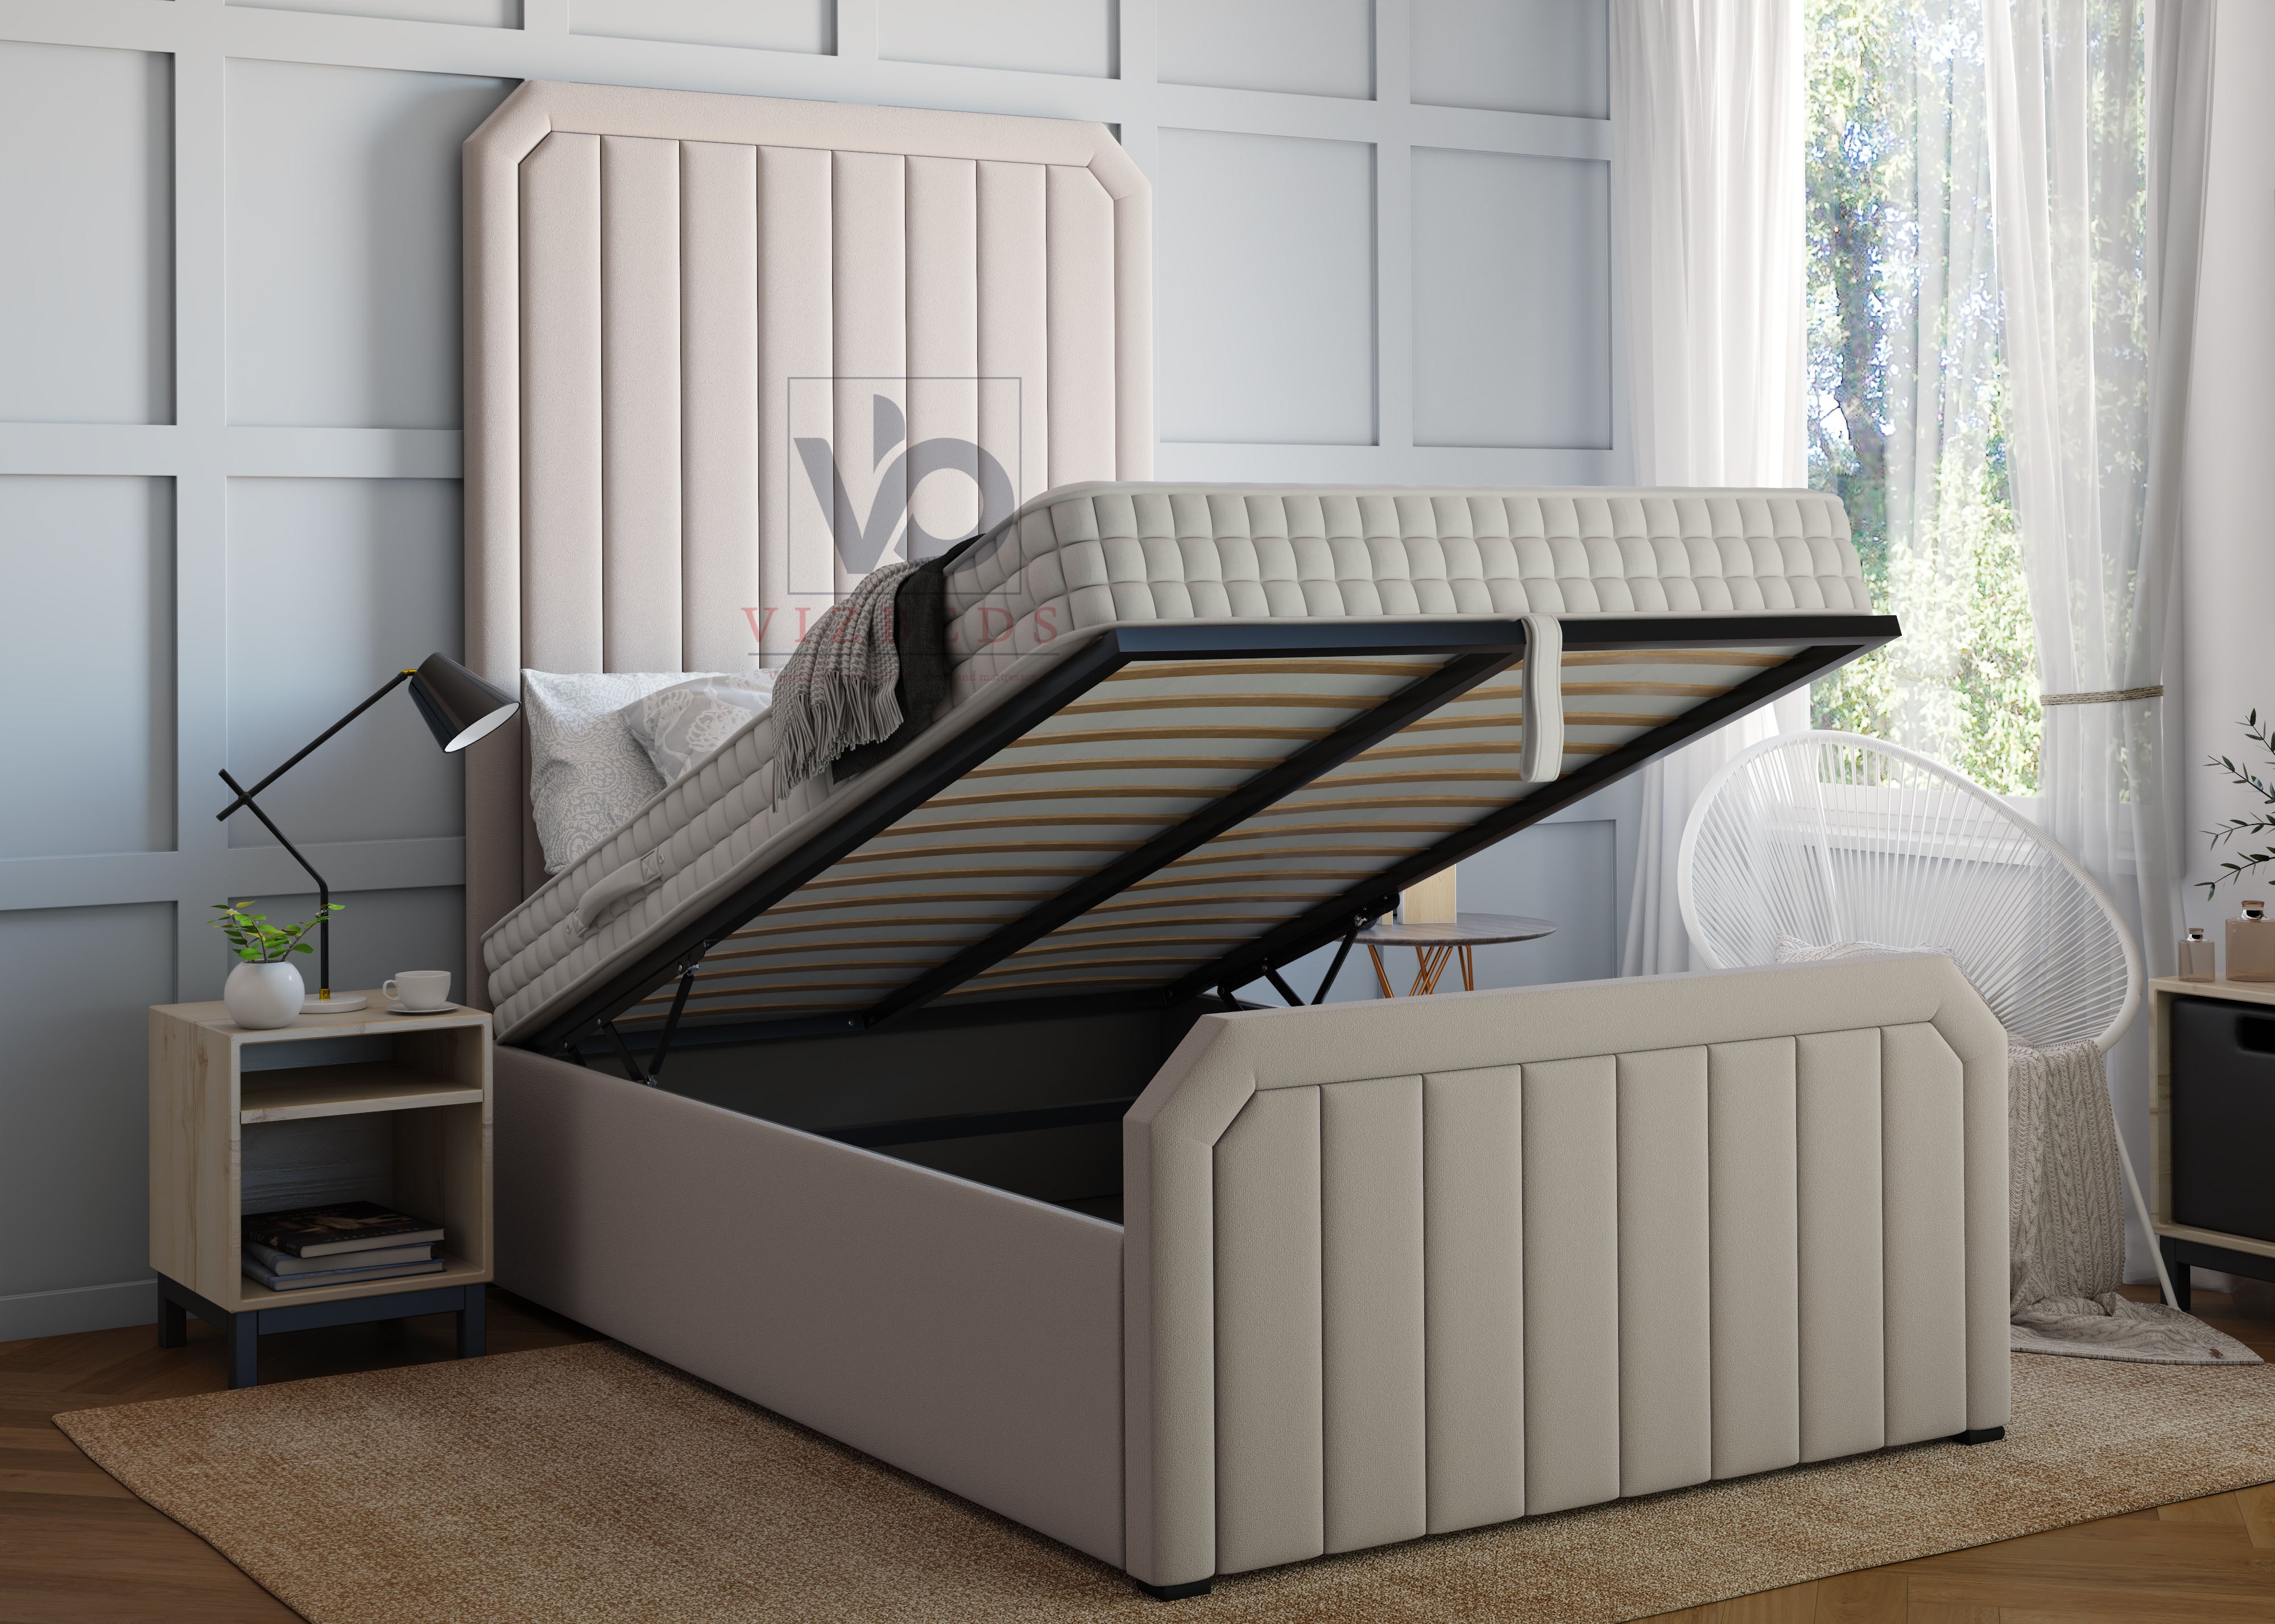 Hyponos Luxury Bed With Extended Headboard